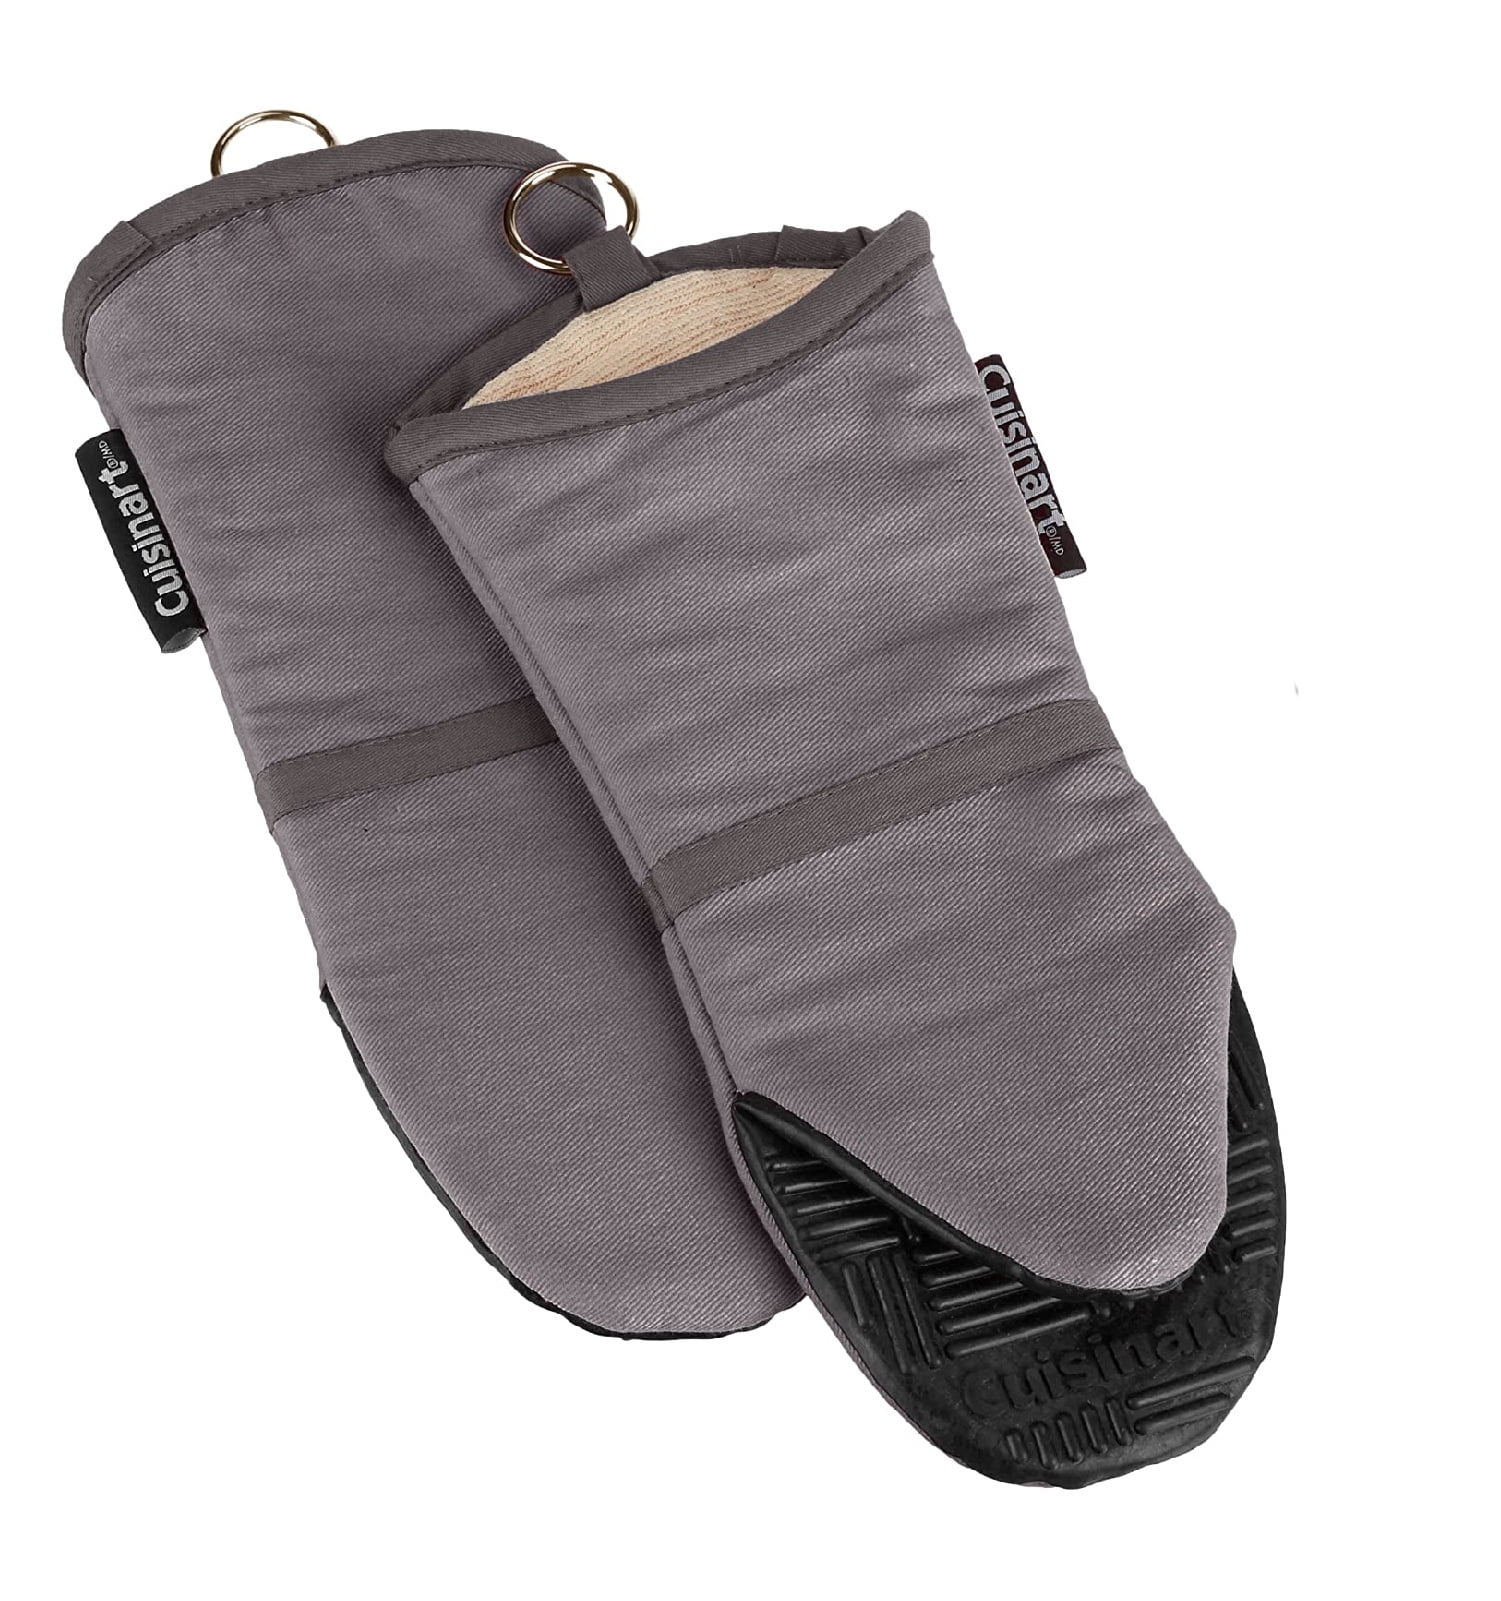 Cuisinart Oven Mitts (2 ct), Delivery Near You